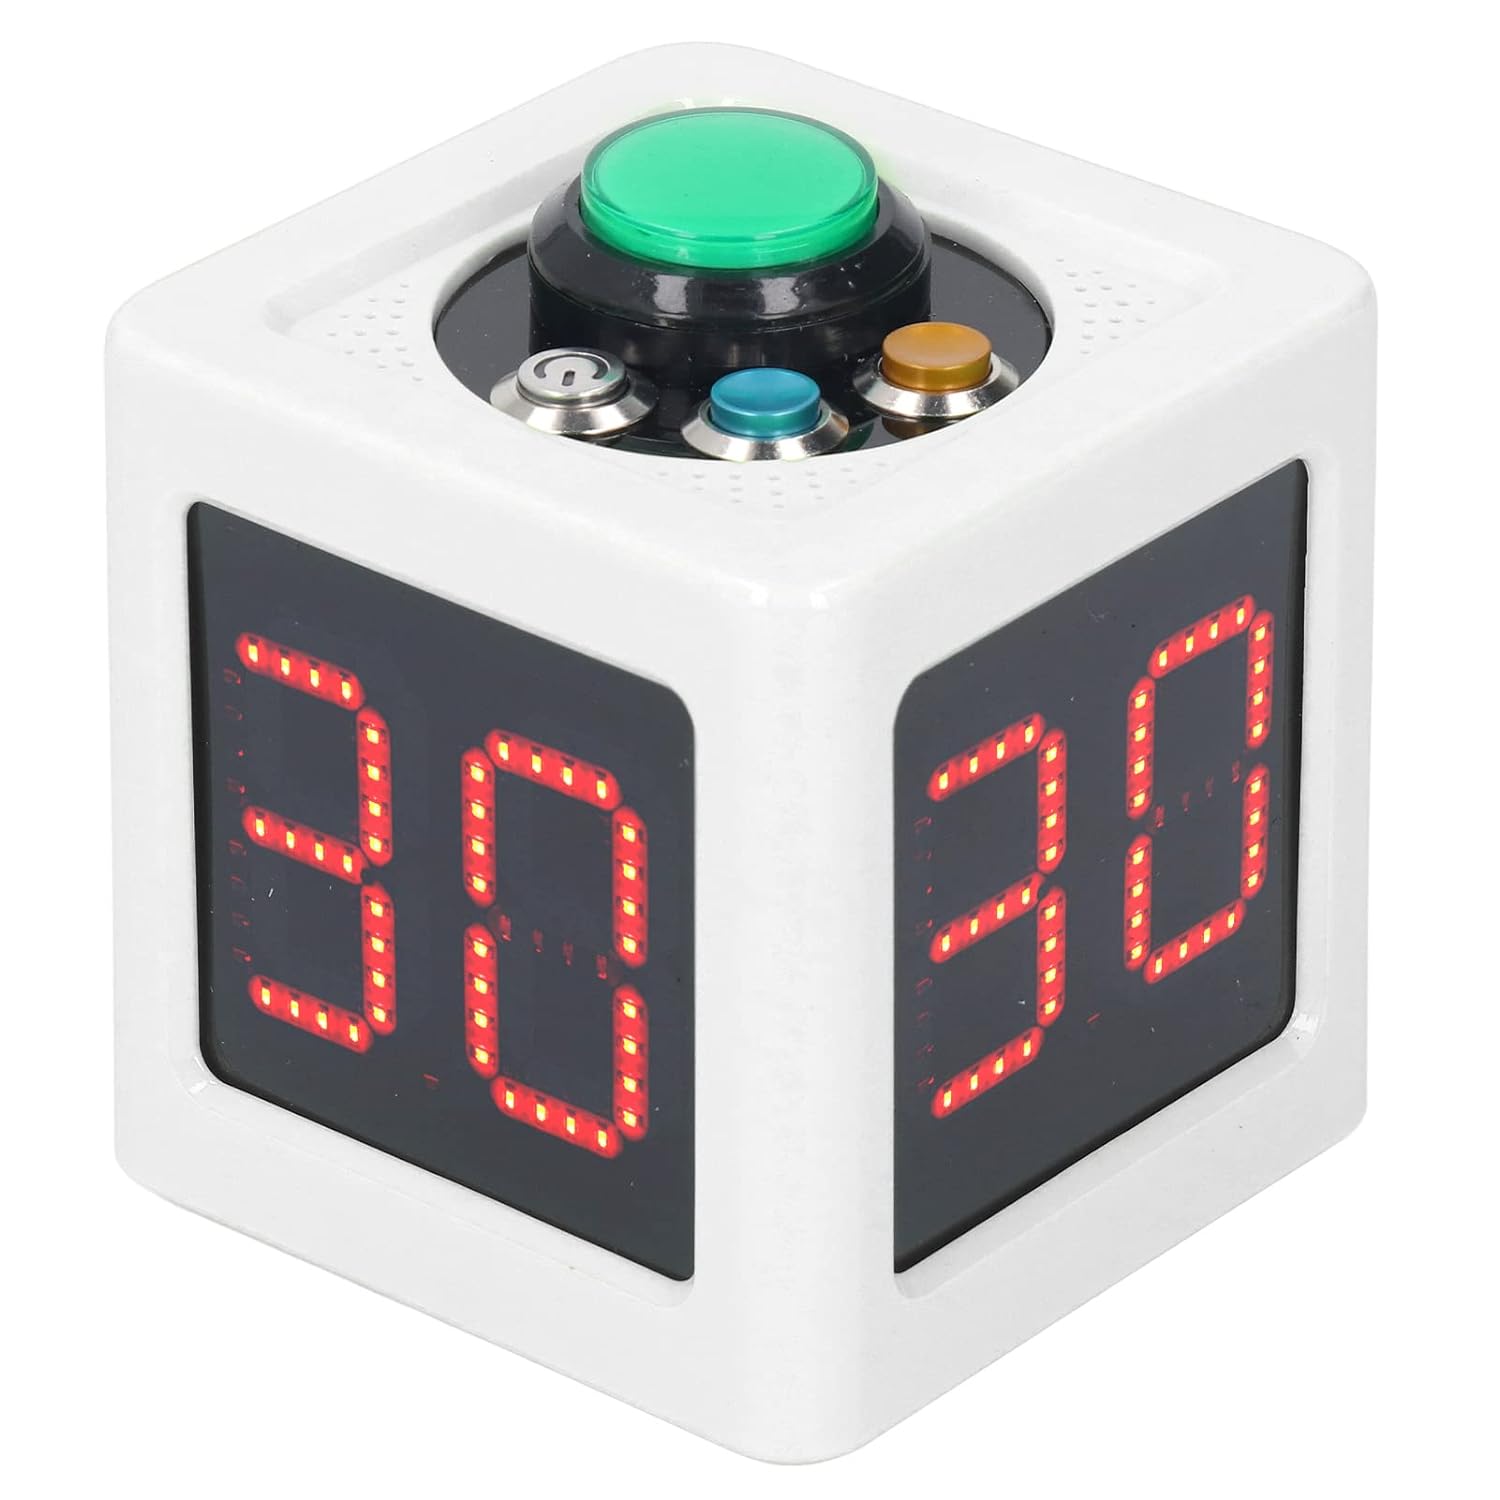 Countdown Stopwatch, Cube Timer 1.4in HD Display Adjustable Brightness with Alarm for Private Poker (White)